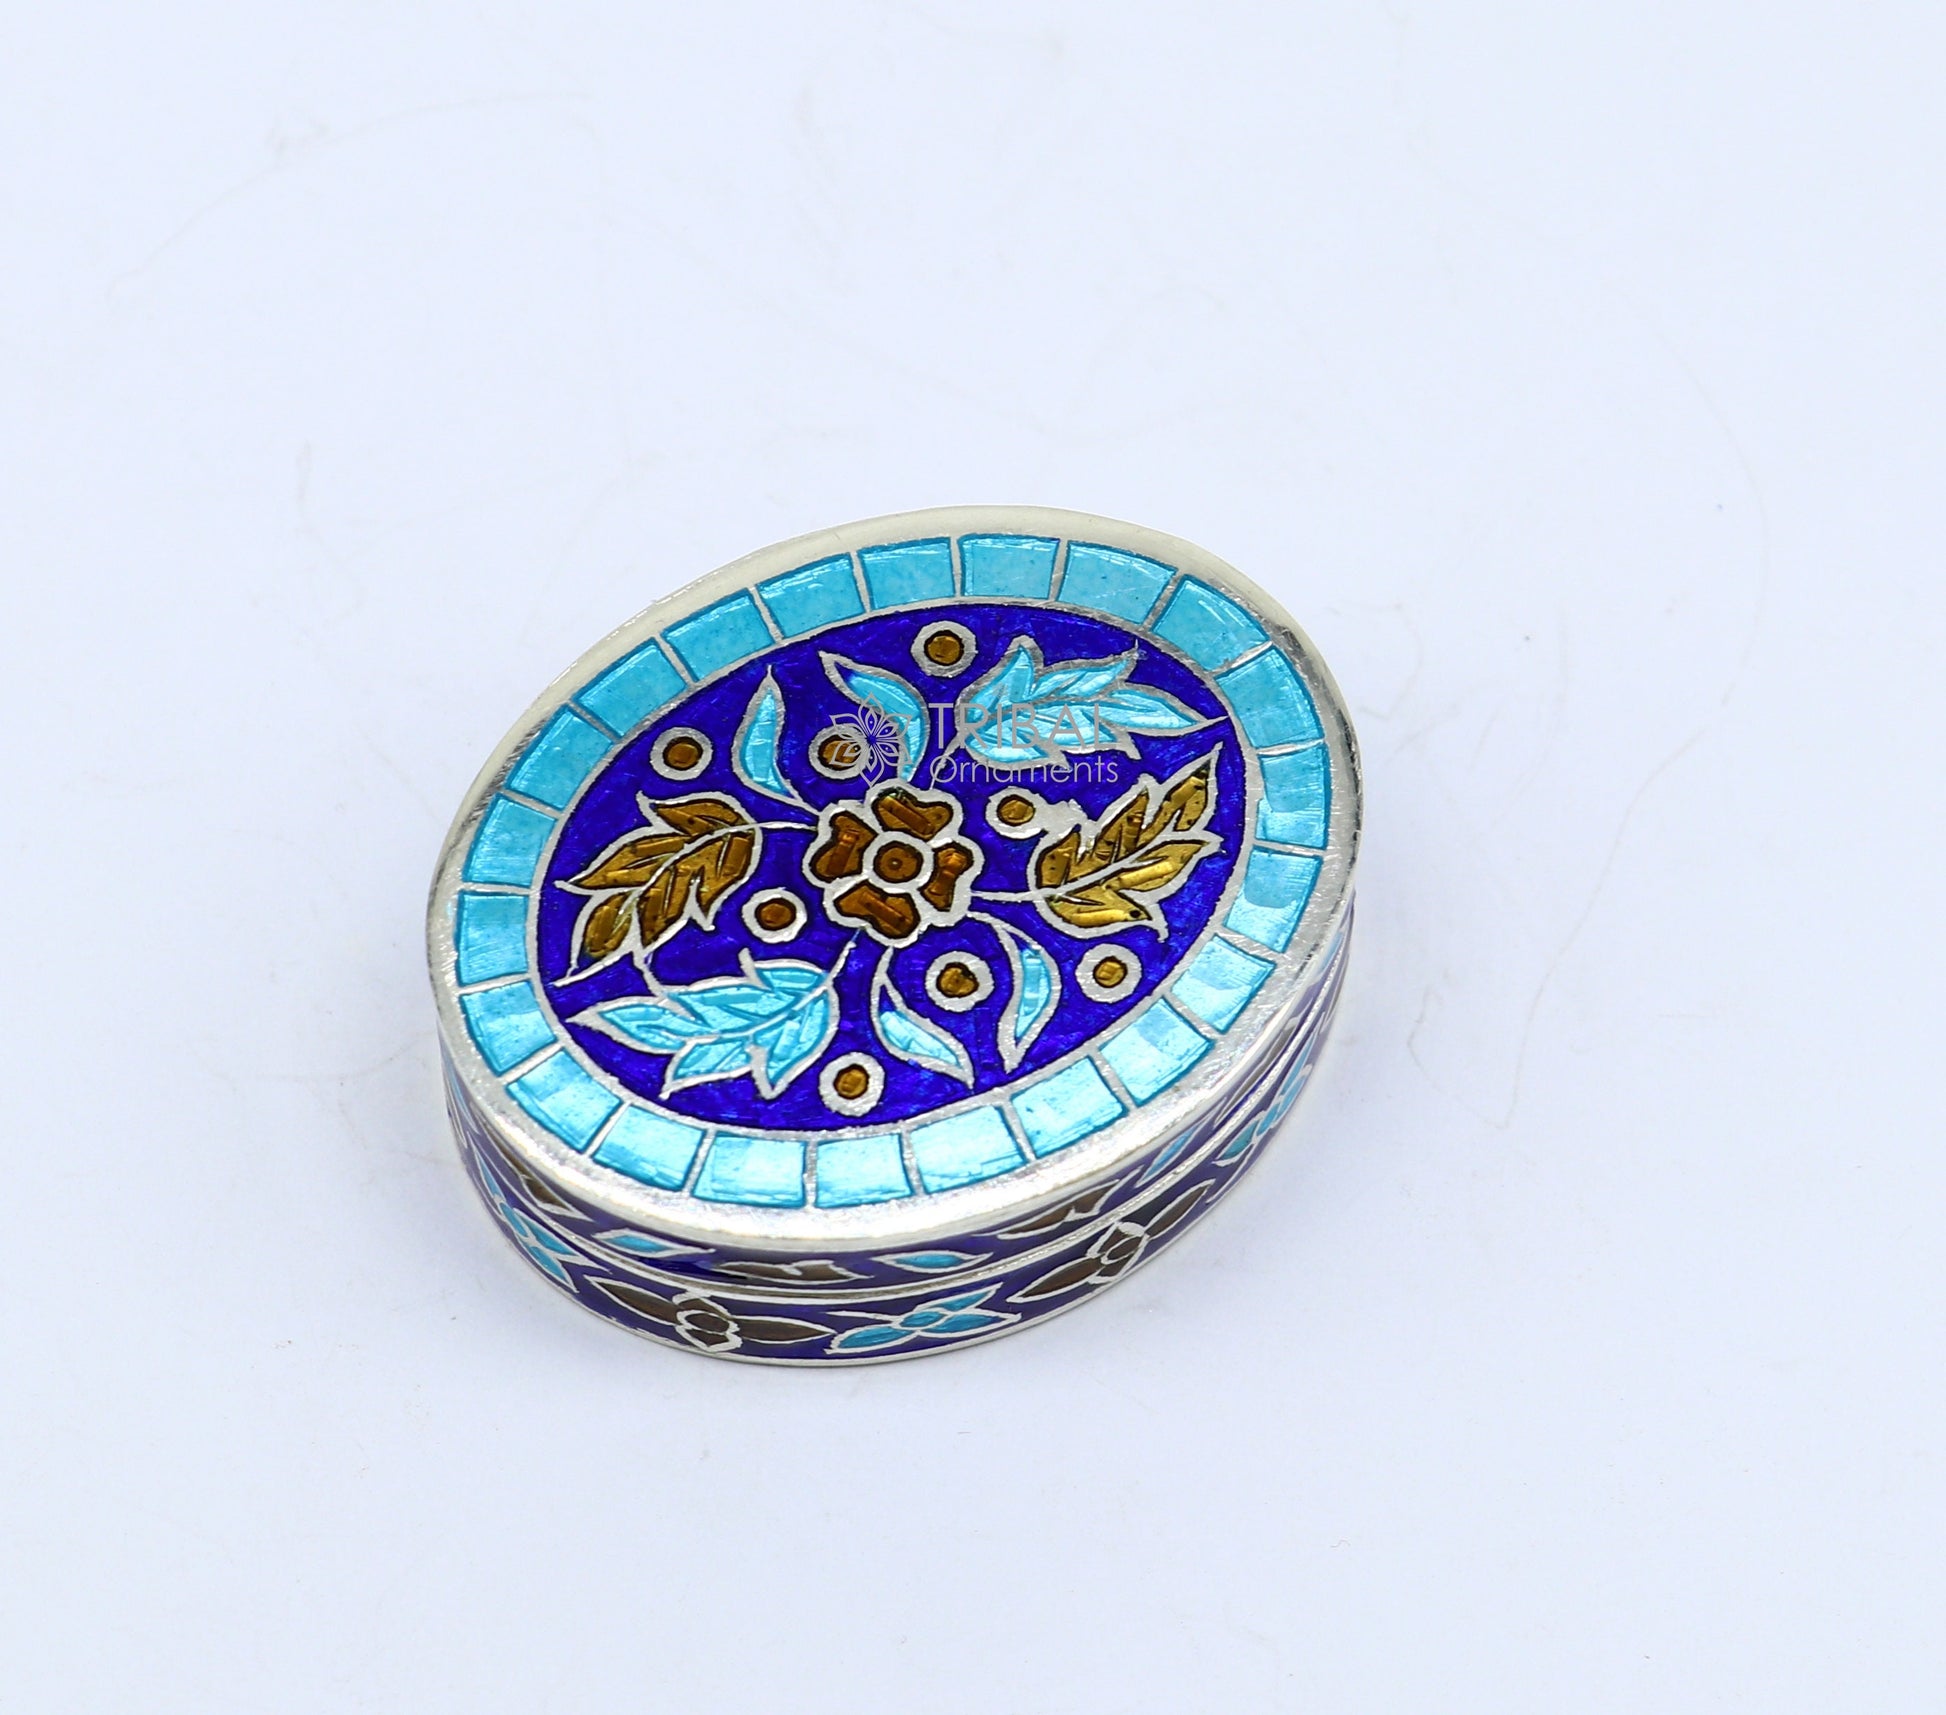 Trendy cultural style 925 sterling silver trinket box, casket box, container, Sindoor box vintage design enamel brides jewelry stb771 - TRIBAL ORNAMENTS